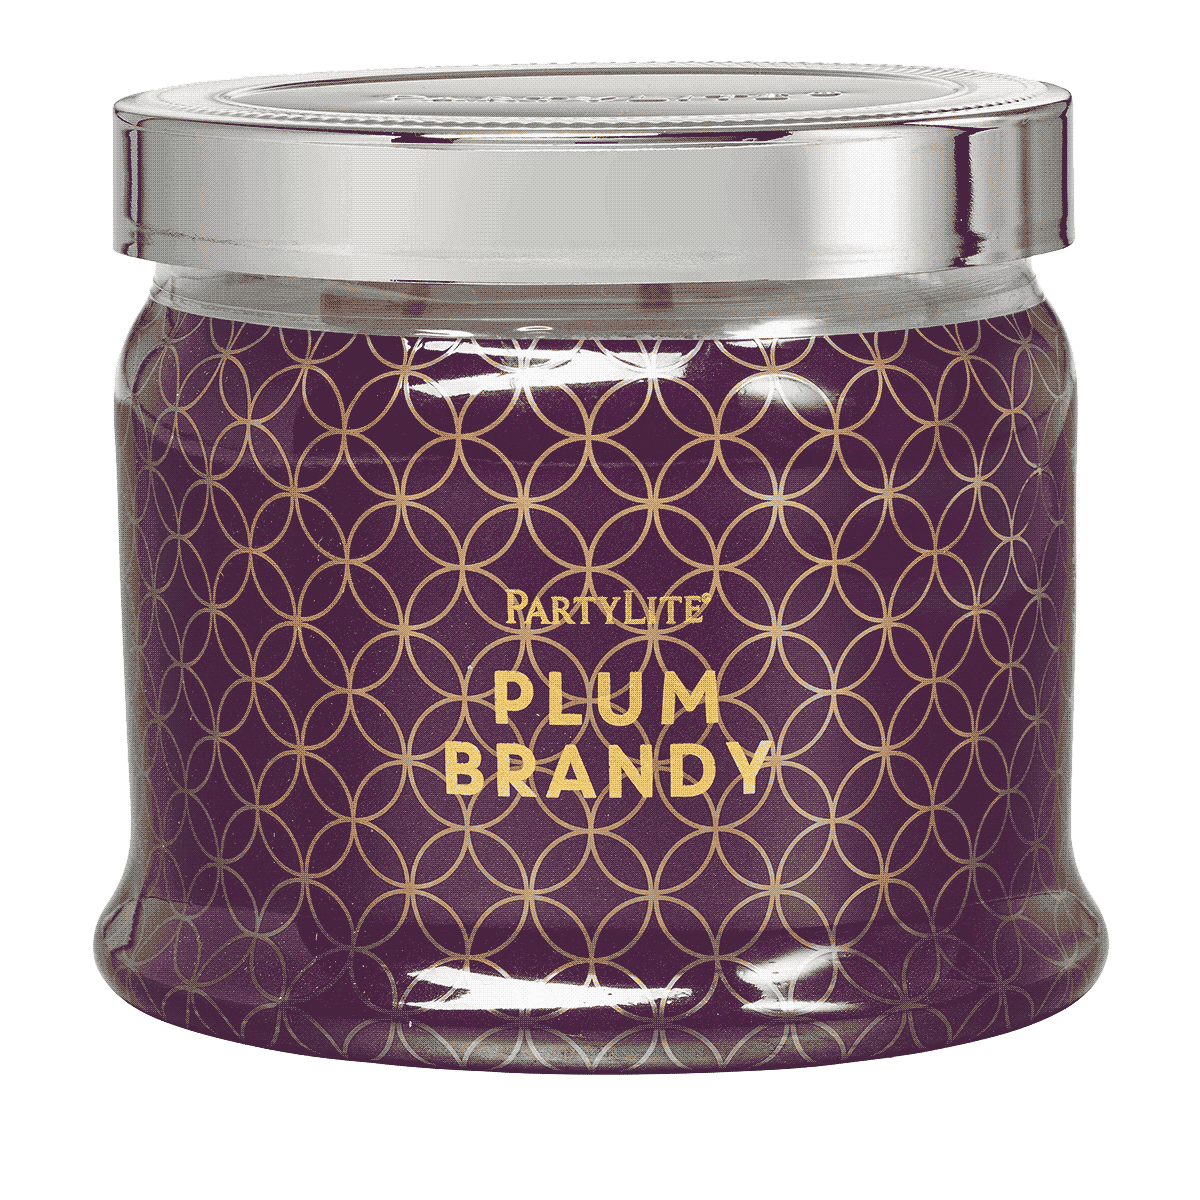 Plum Brandy 3-Wick Decorative Scented Jar Candle - PartyLite US